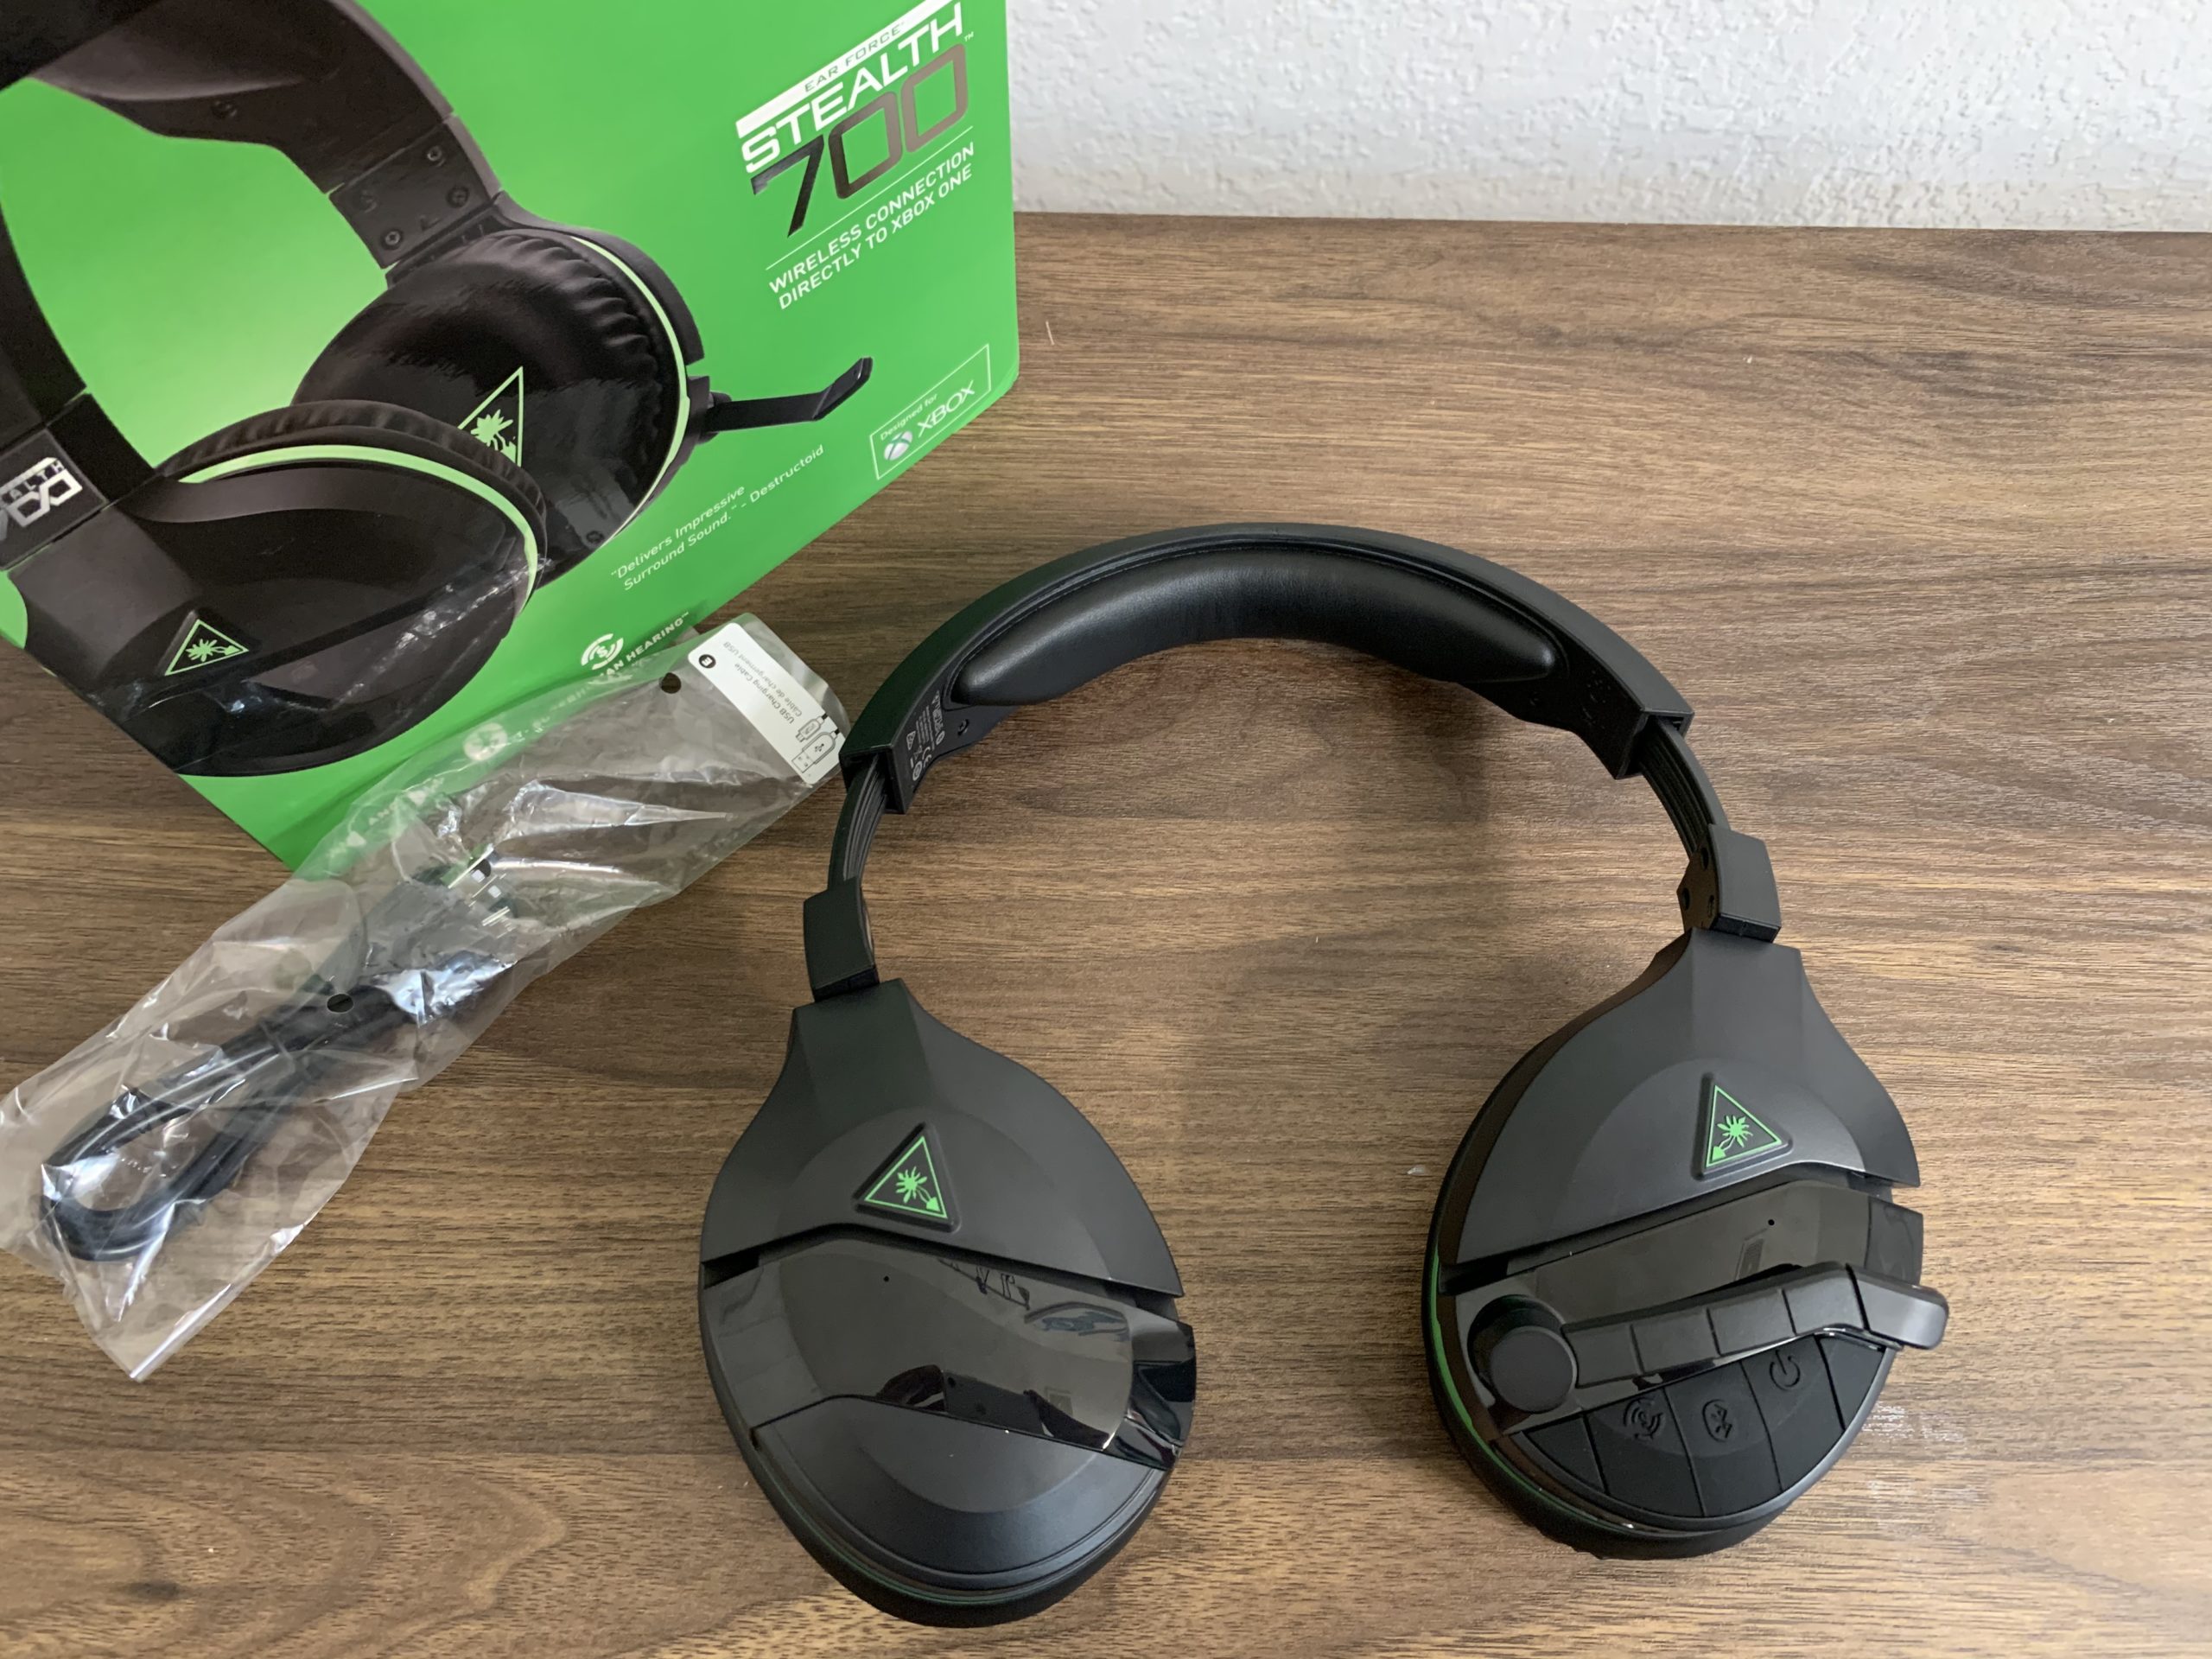 Turtle Beach Stealth 700 Xbox One Gaming Headset Review